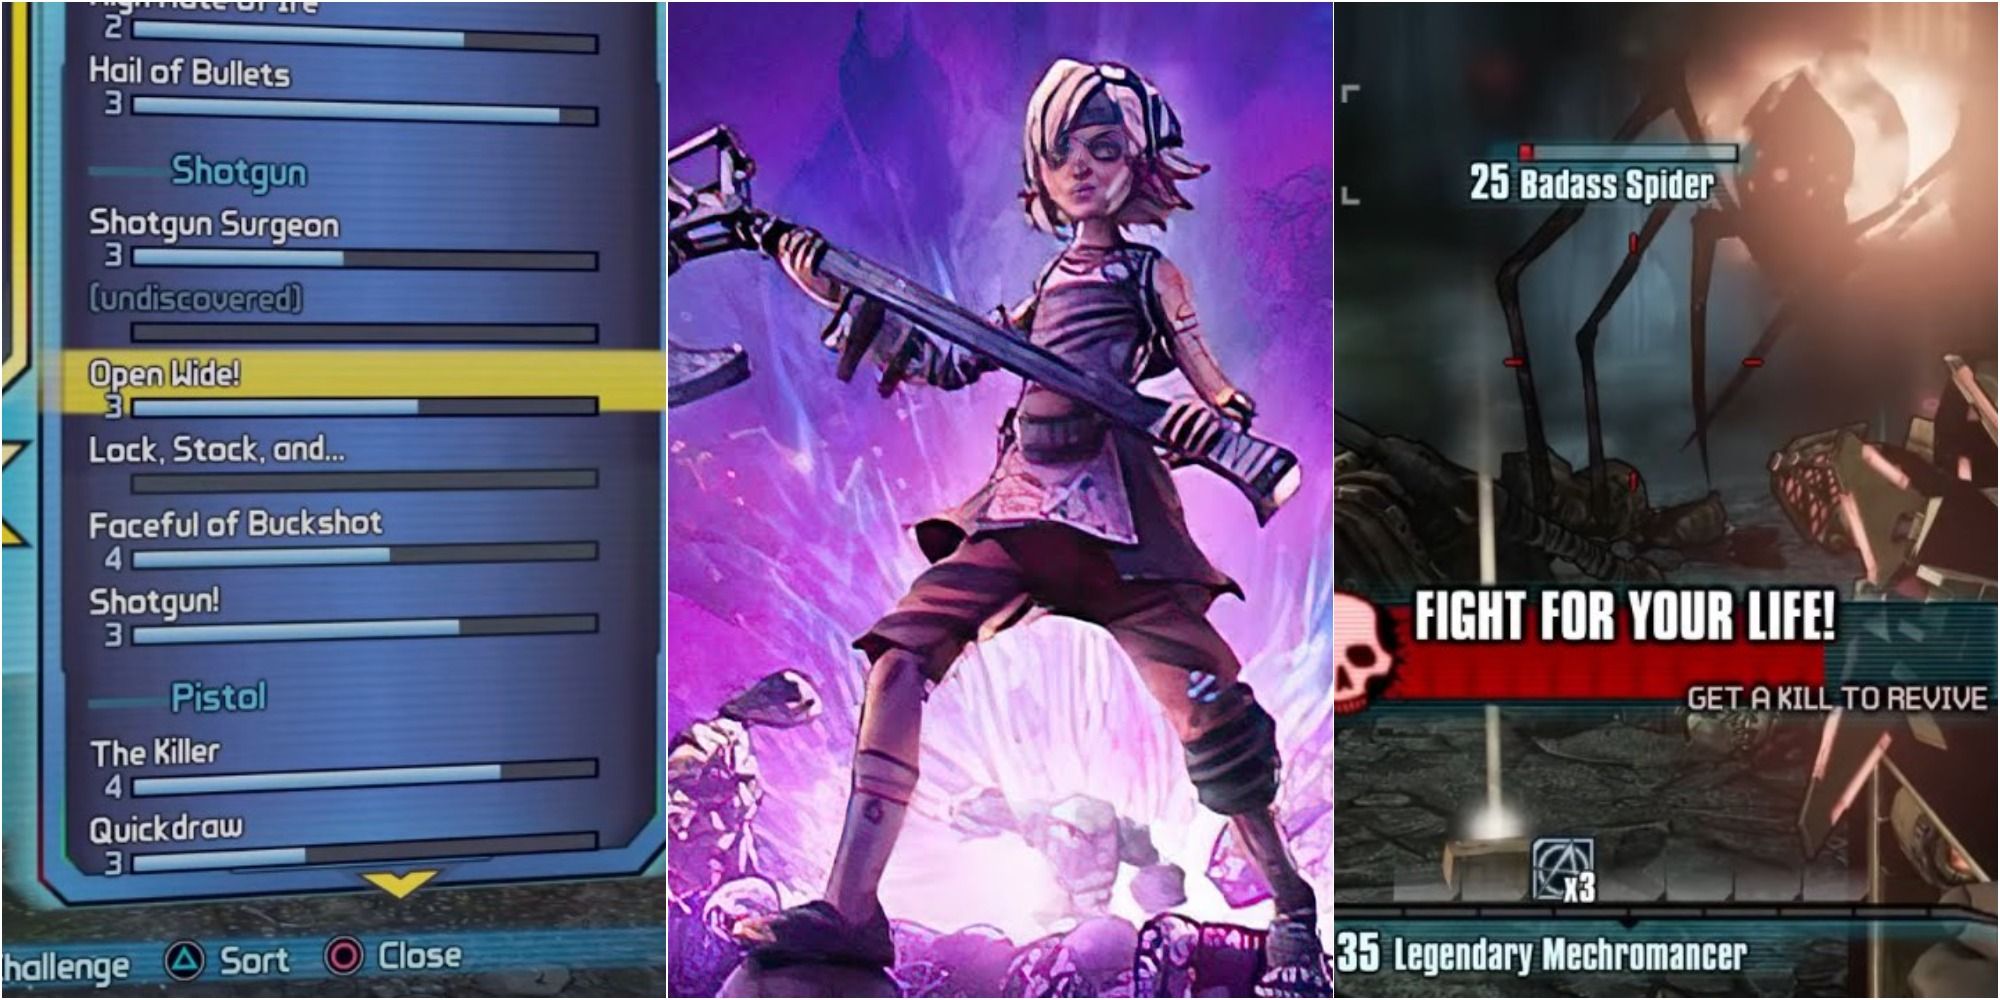 Split image of Borderlands 2 Tiny Tina Assault Dragon Keep One Shot menu, Tiny holding axe art and fighting badass spider for Challenge Accepted trophy achievement